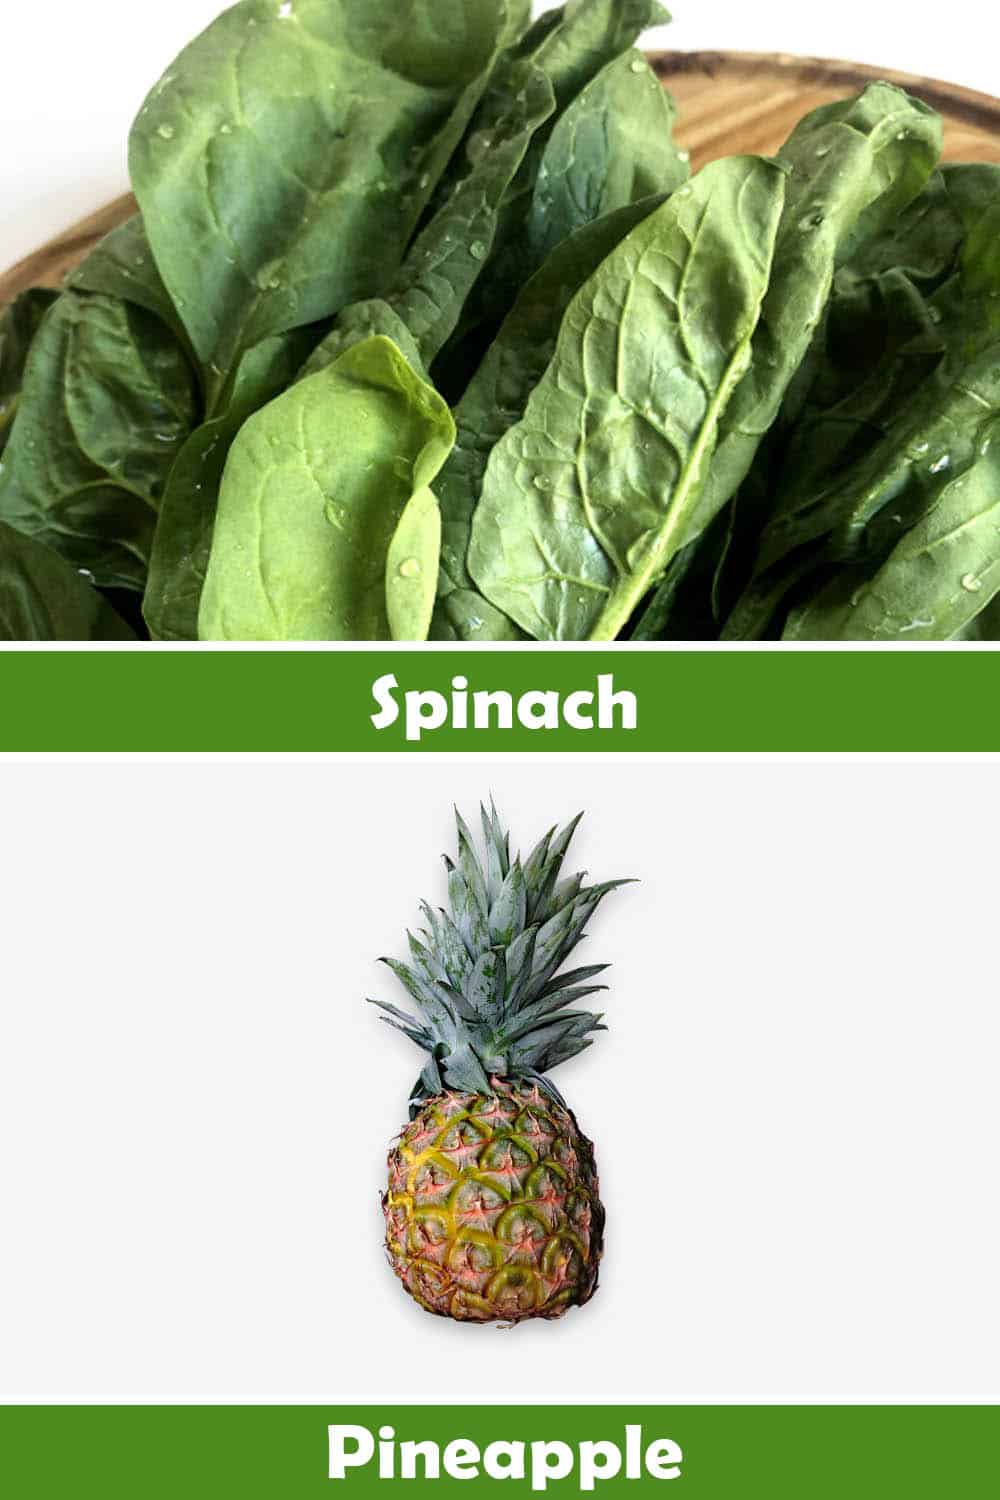 SPINACH AND PINEAPPLE